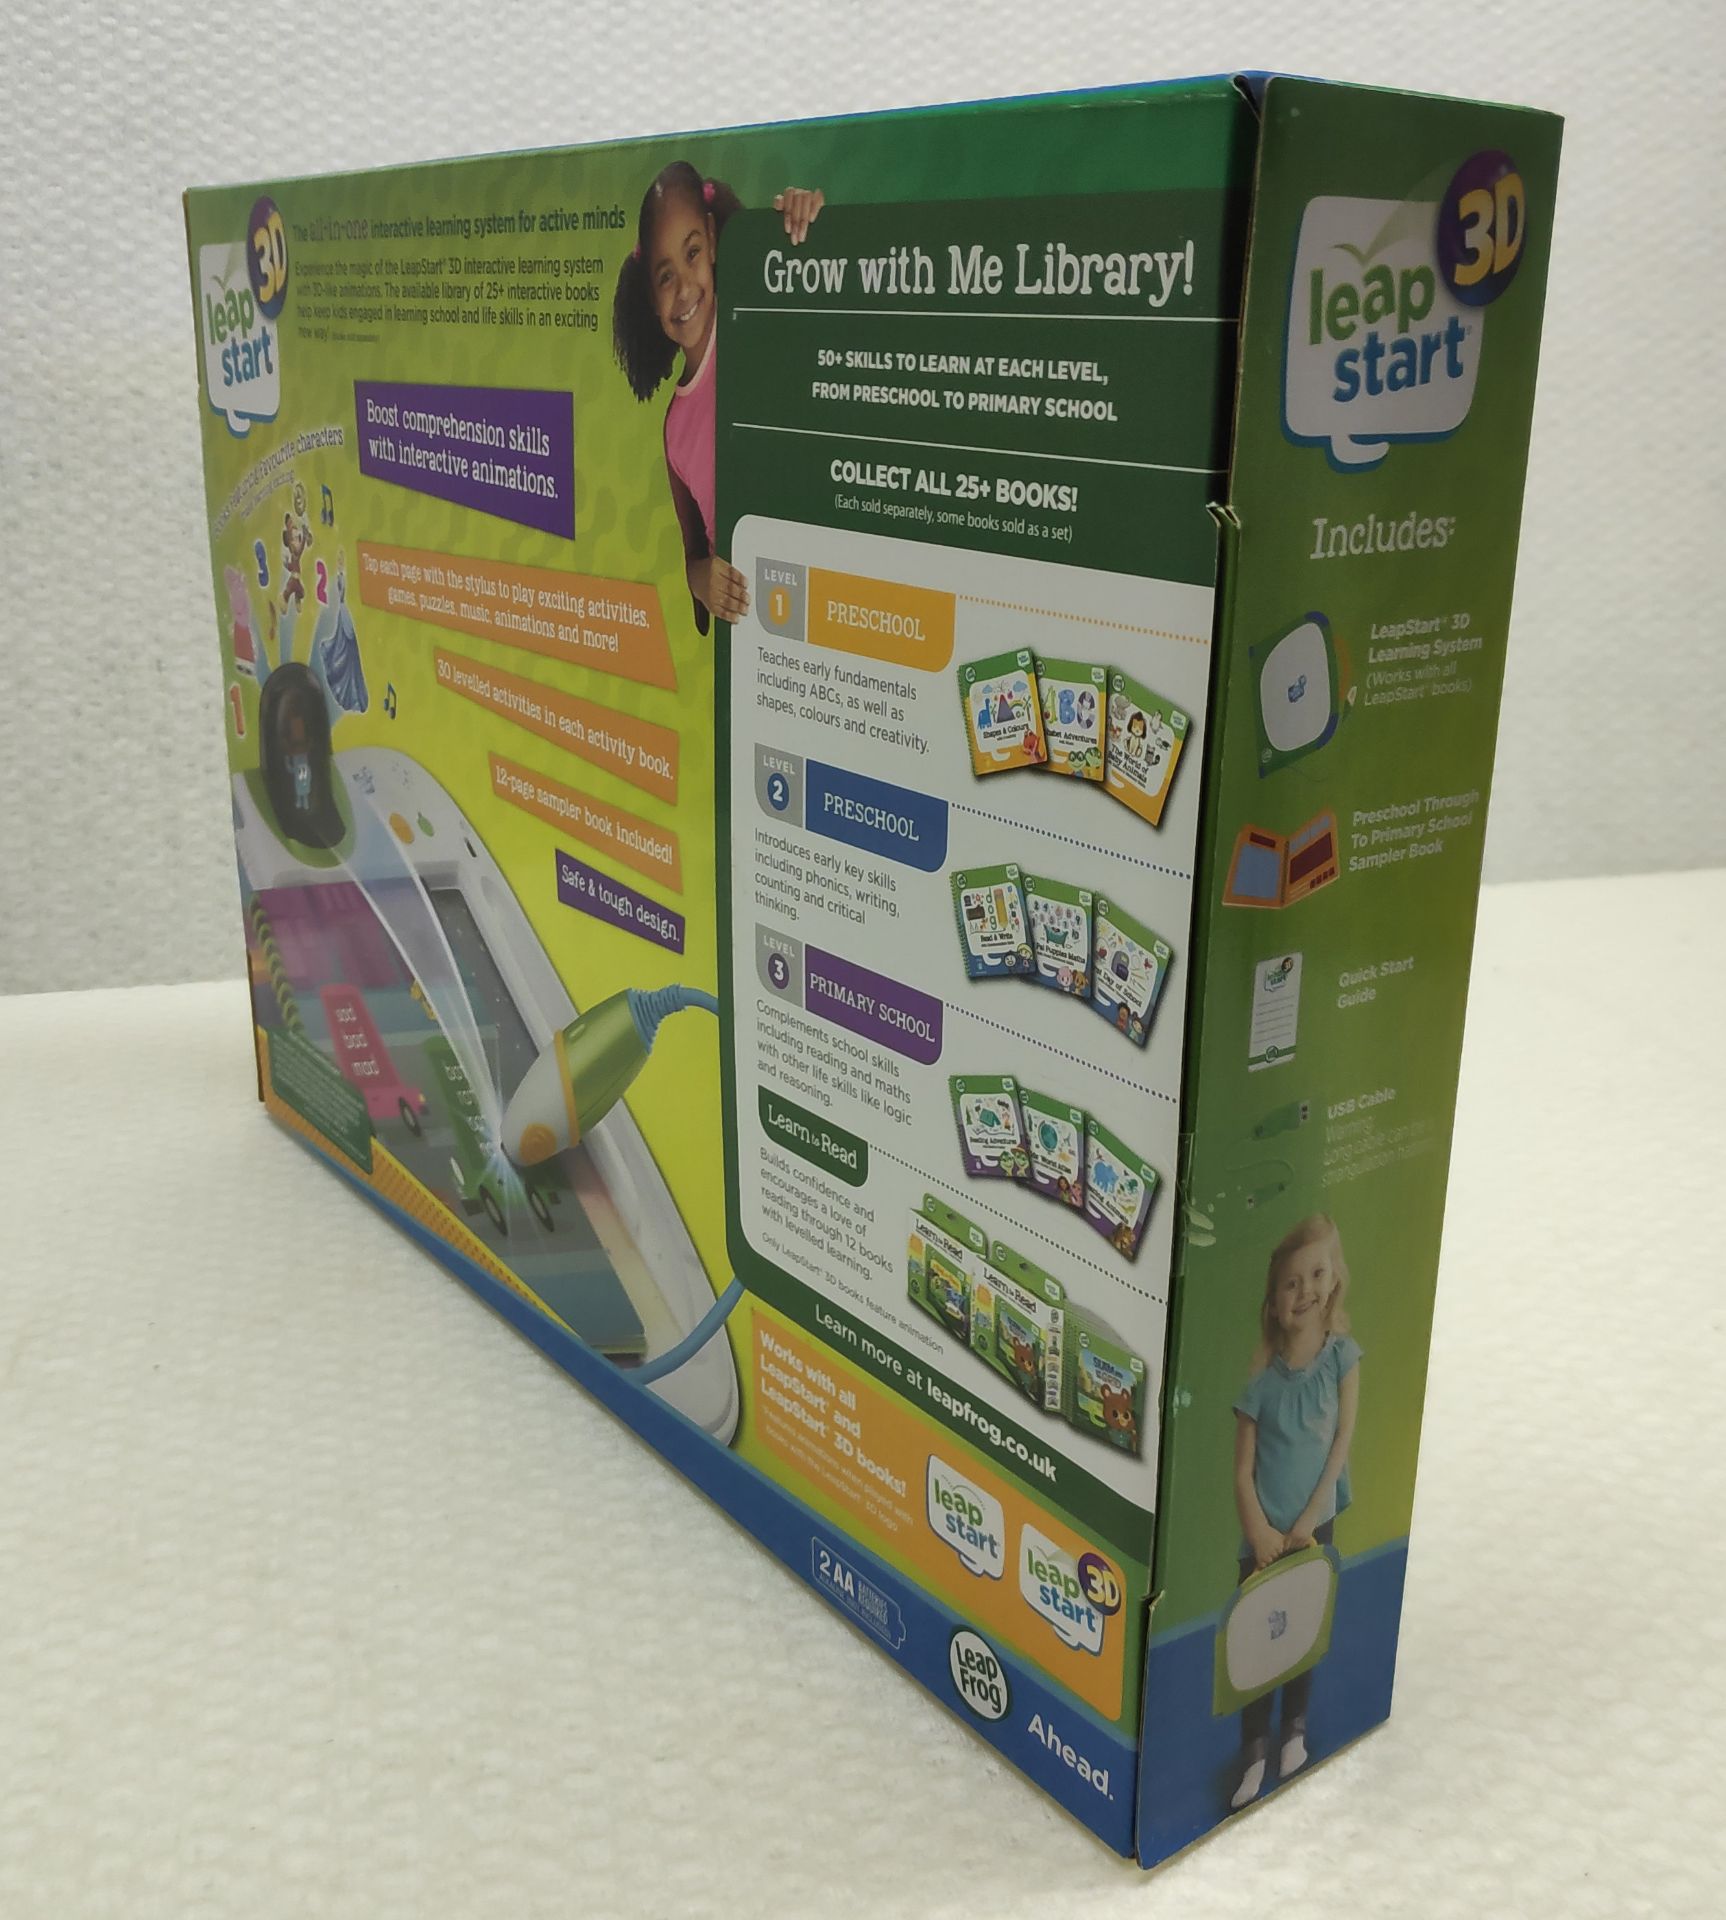 1 x LeapFrog LeapStart 3D Interactive Learing System - New/Boxed - Image 3 of 6